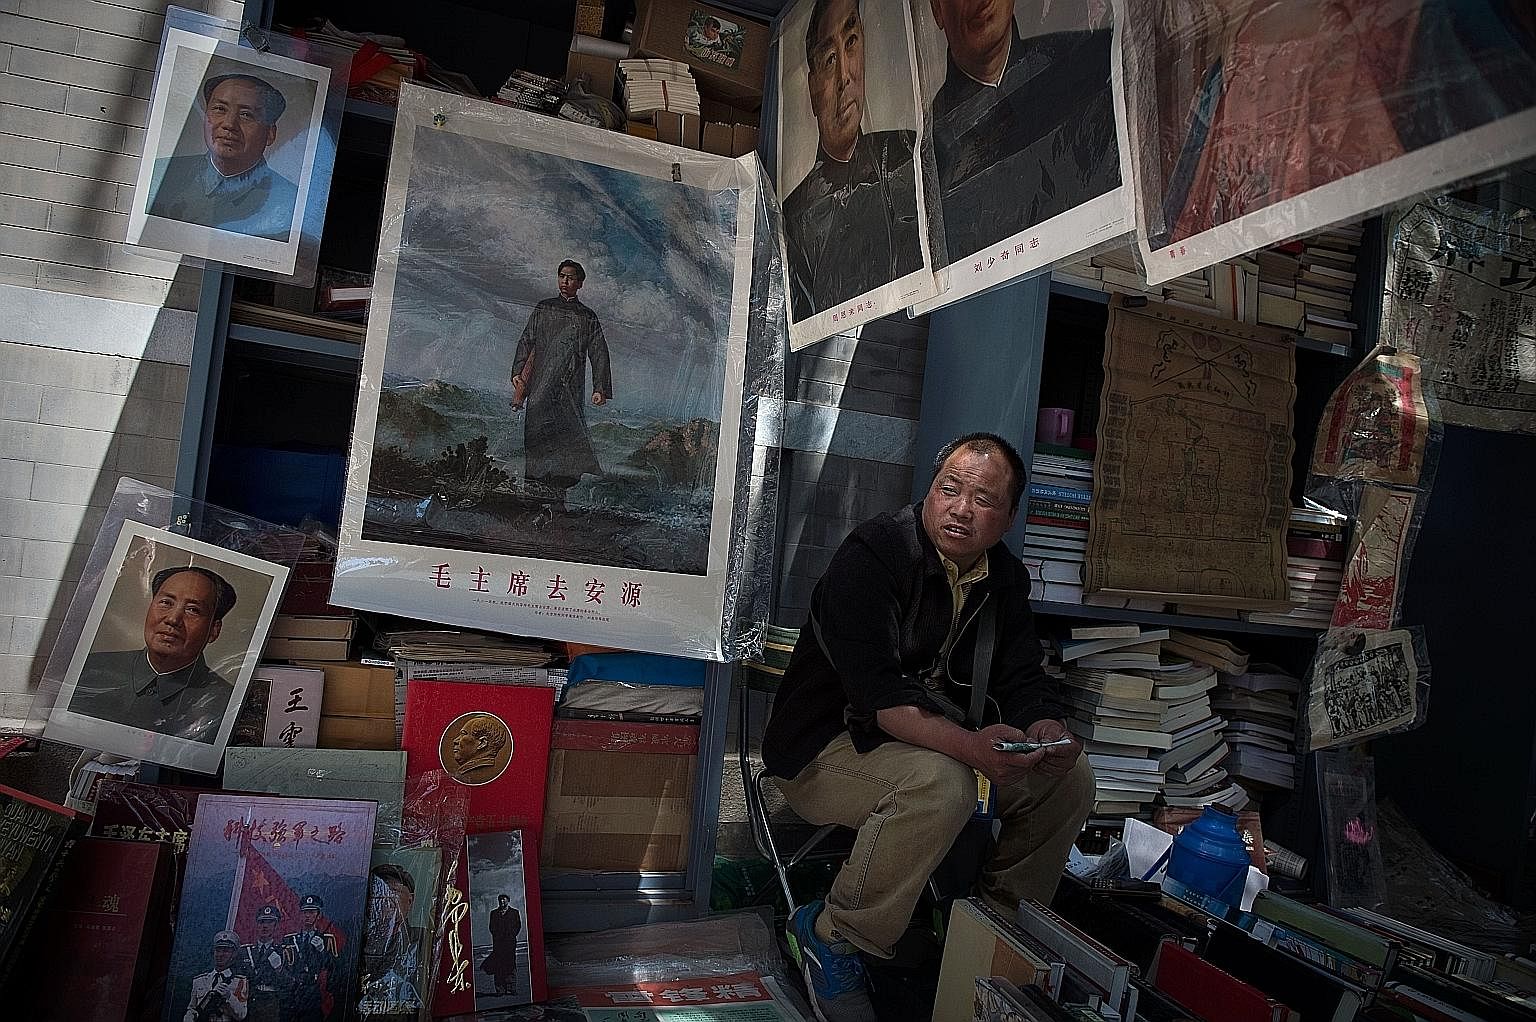 Posters and images of Mao Zedong in a Beijing market. Fifty years after the Cultural Revolution, Mao's legacy remains. The lack of literature within China chronicling the brutality of the period, and the lack of public debate, has also meant that you